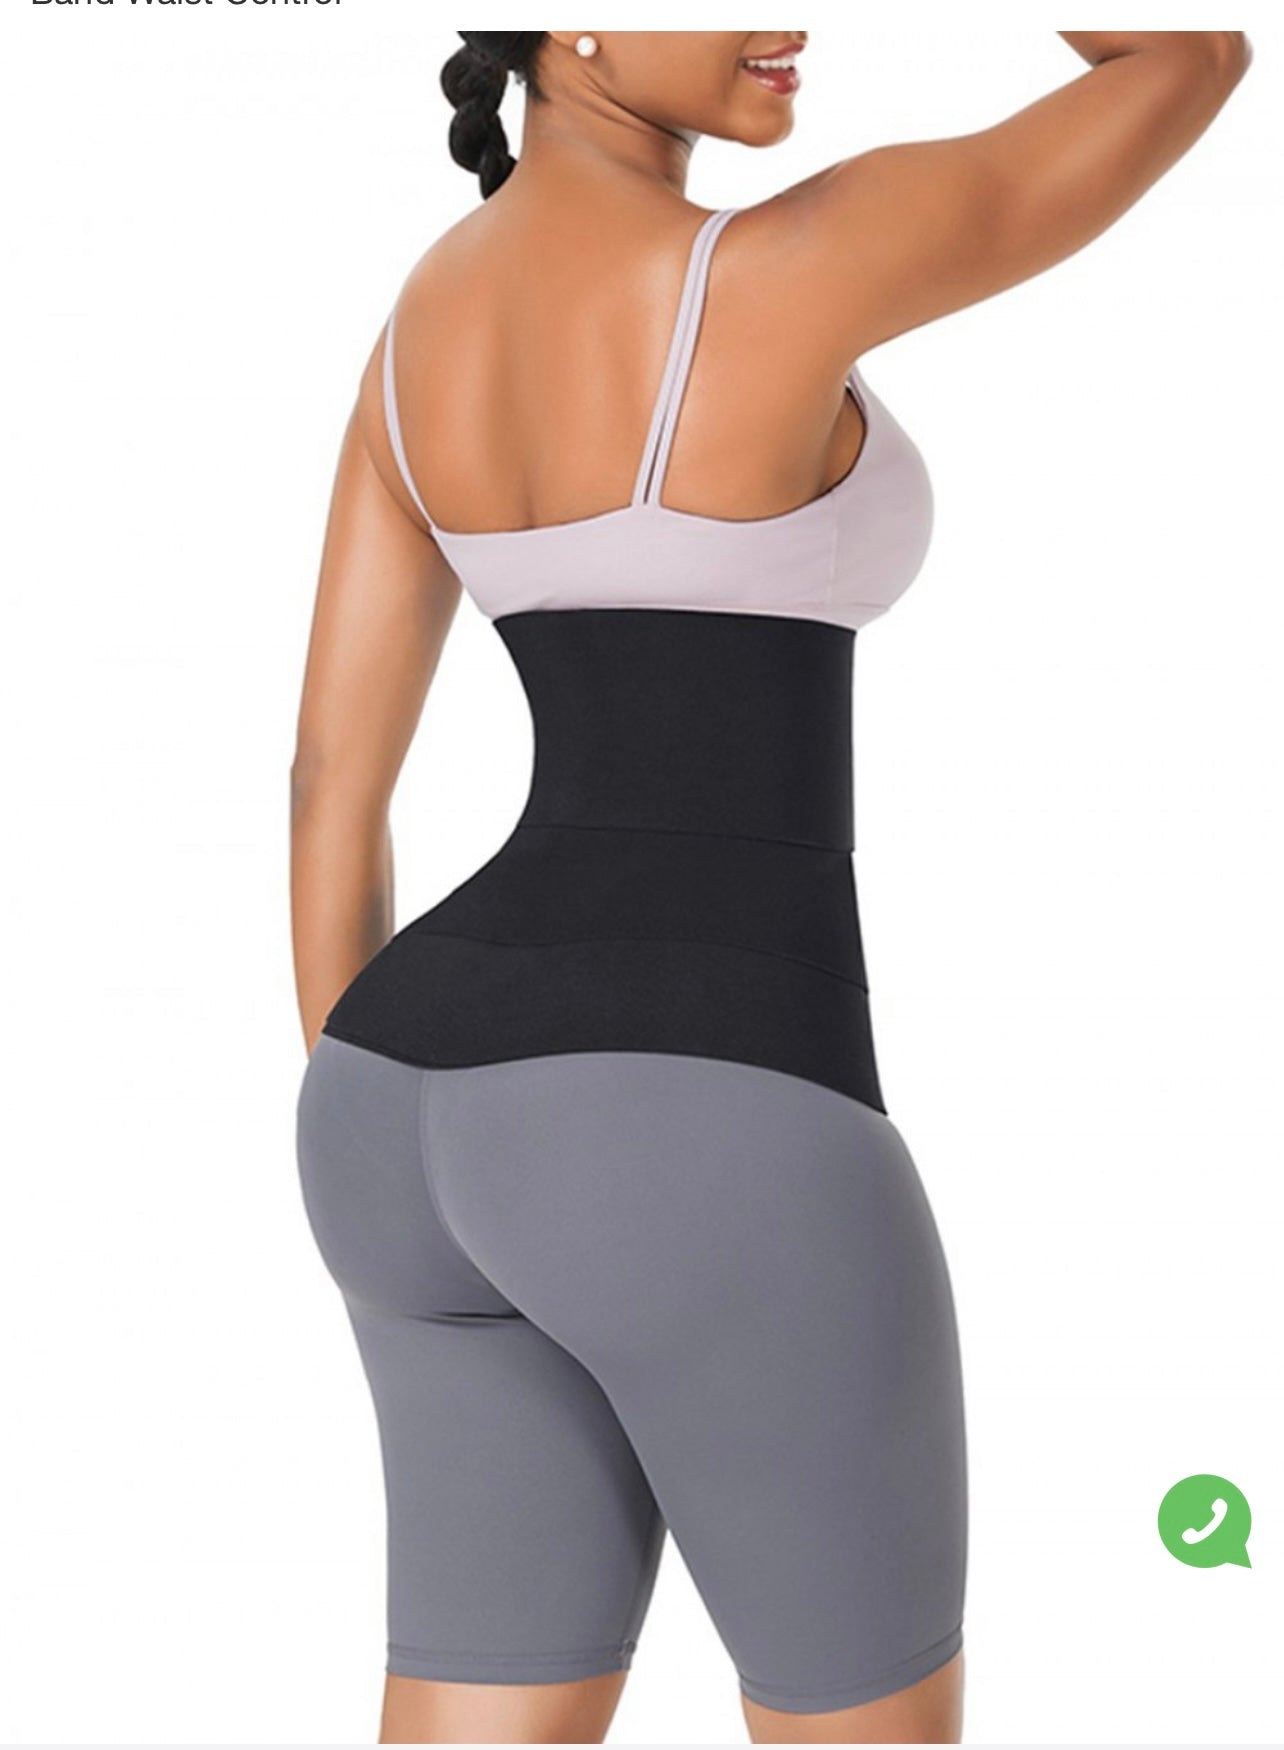 EasyWrap Waist Trainer/ One size fit all - WrapAndTuck